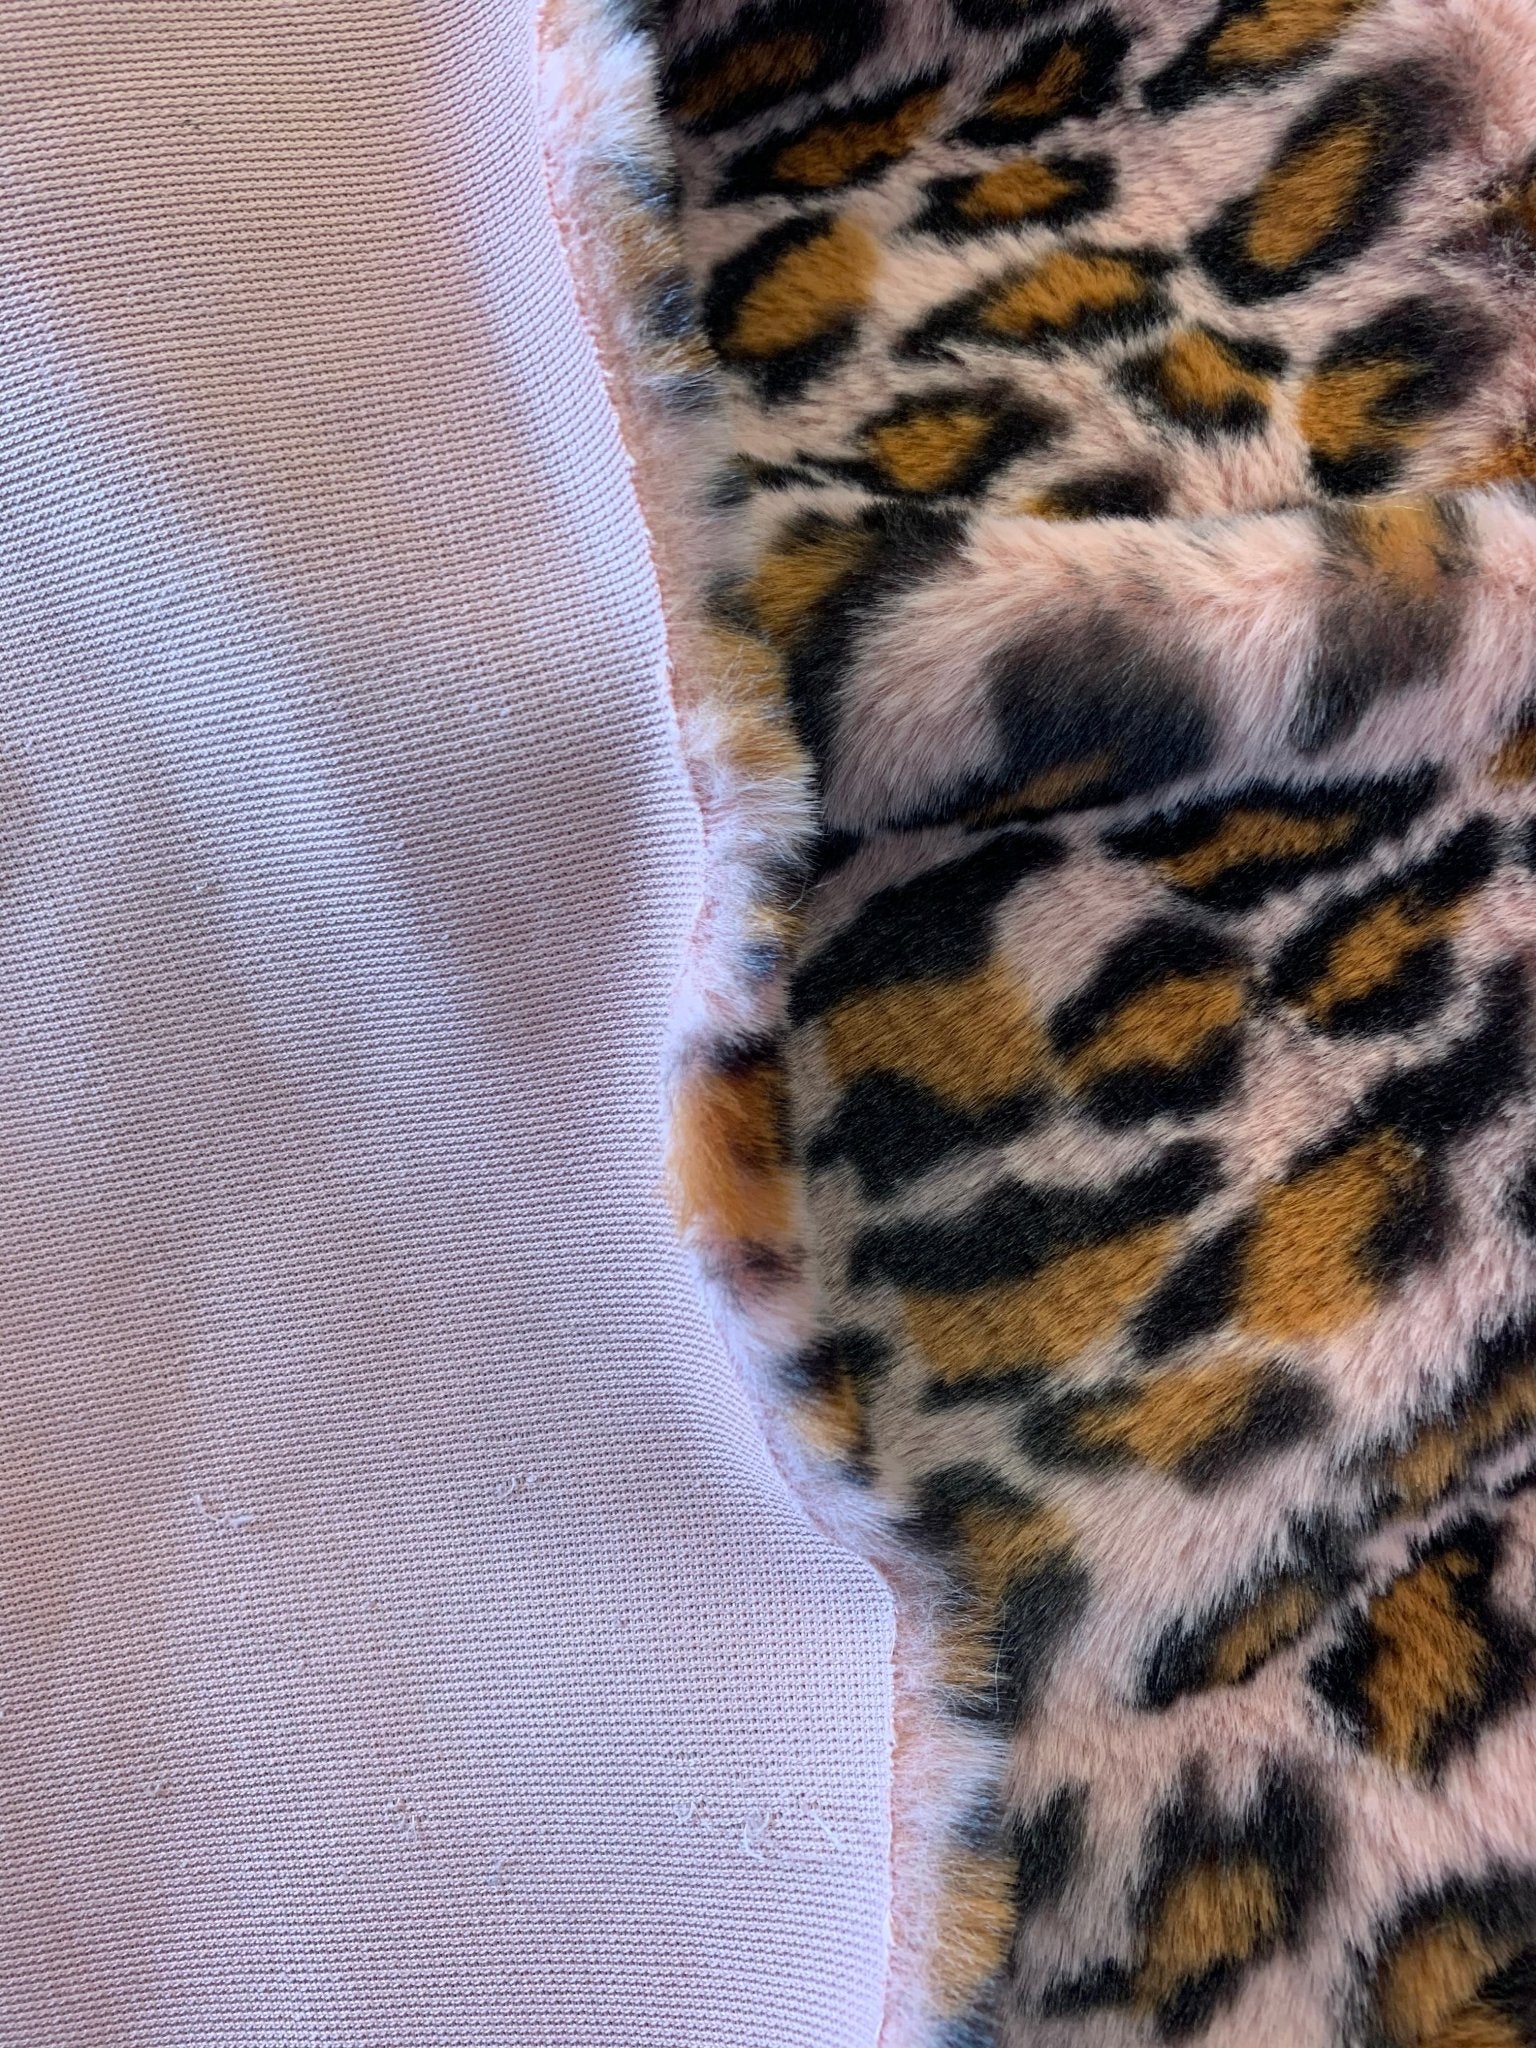 Leopard Fake Faux Fur Fabric By The Yard - Faux Fur Material Fashion FabricICEFABRICICE FABRICSPinkBy The Yard (60 inches Wide)Leopard Fake Faux Fur Fabric By The Yard - Faux Fur Material Fashion Fabric ICEFABRIC Pink